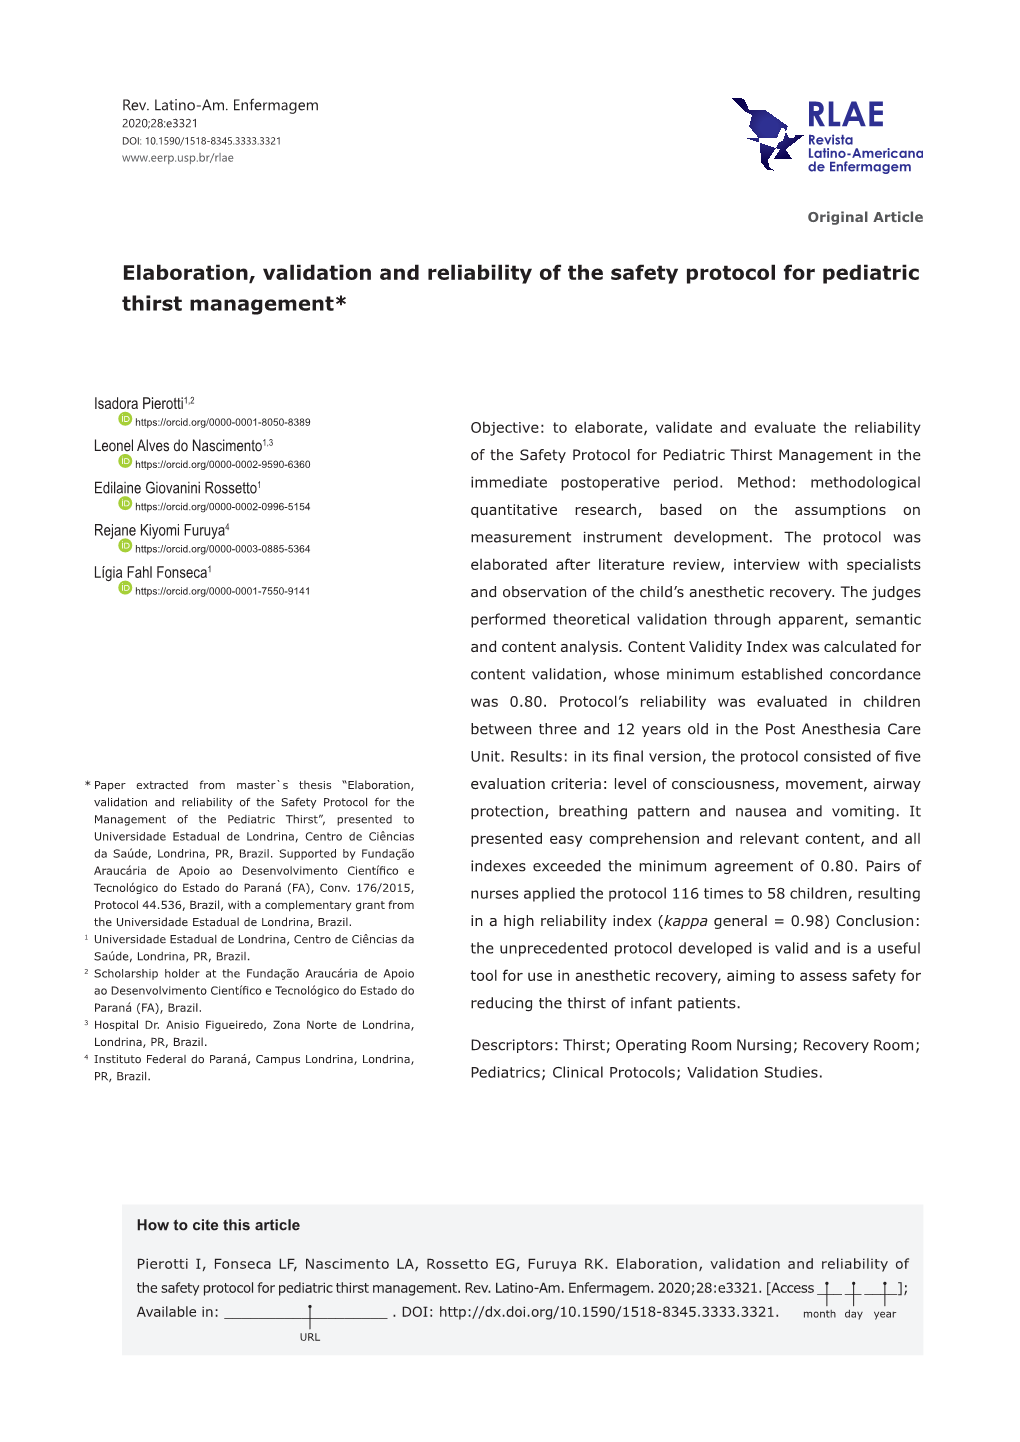 Elaboration, Validation and Reliability of the Safety Protocol for Pediatric Thirst Management*